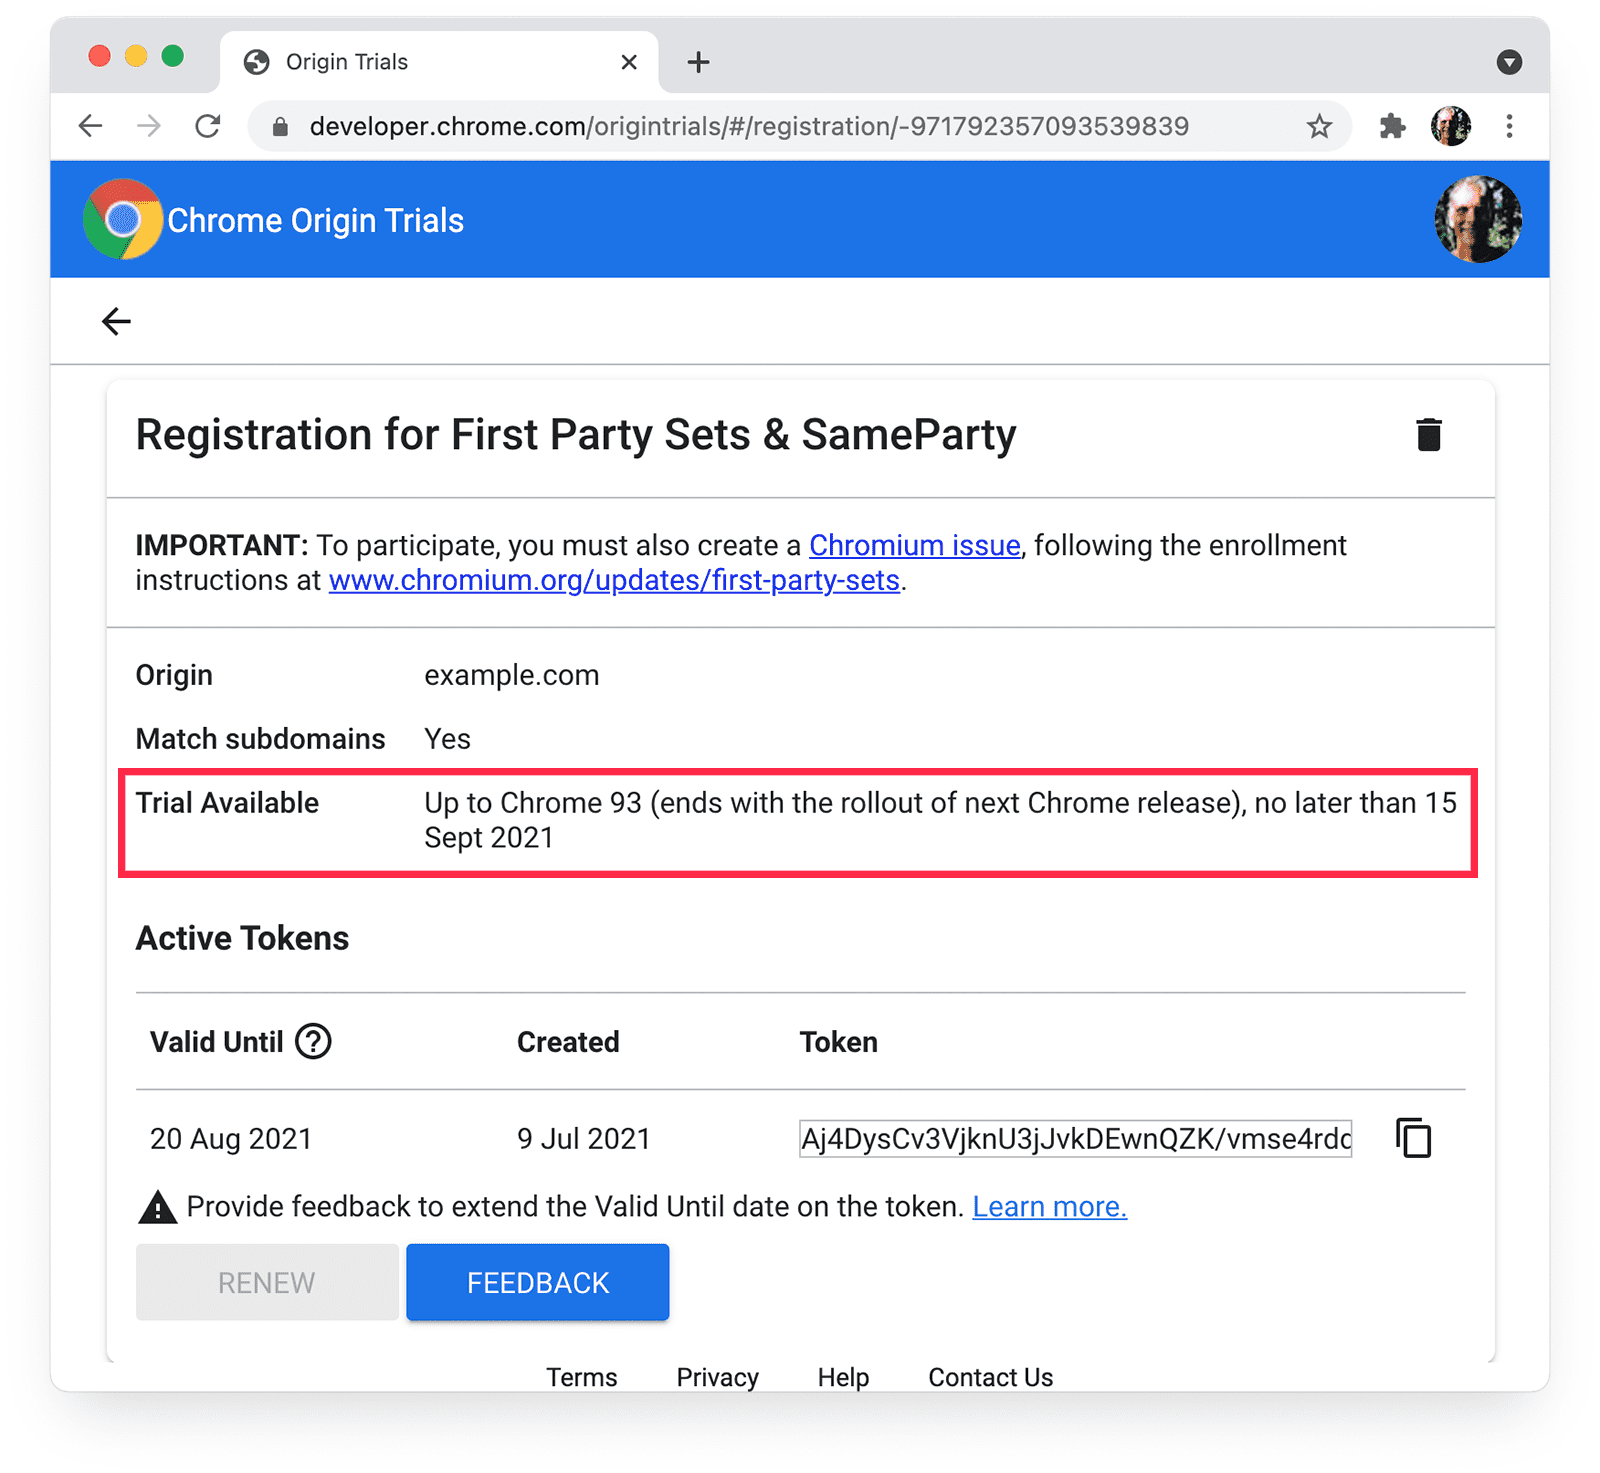 Chrome 來源試用
「第一方集合」頁面，以及《SameParty with Trial available》詳細資料醒目顯示。